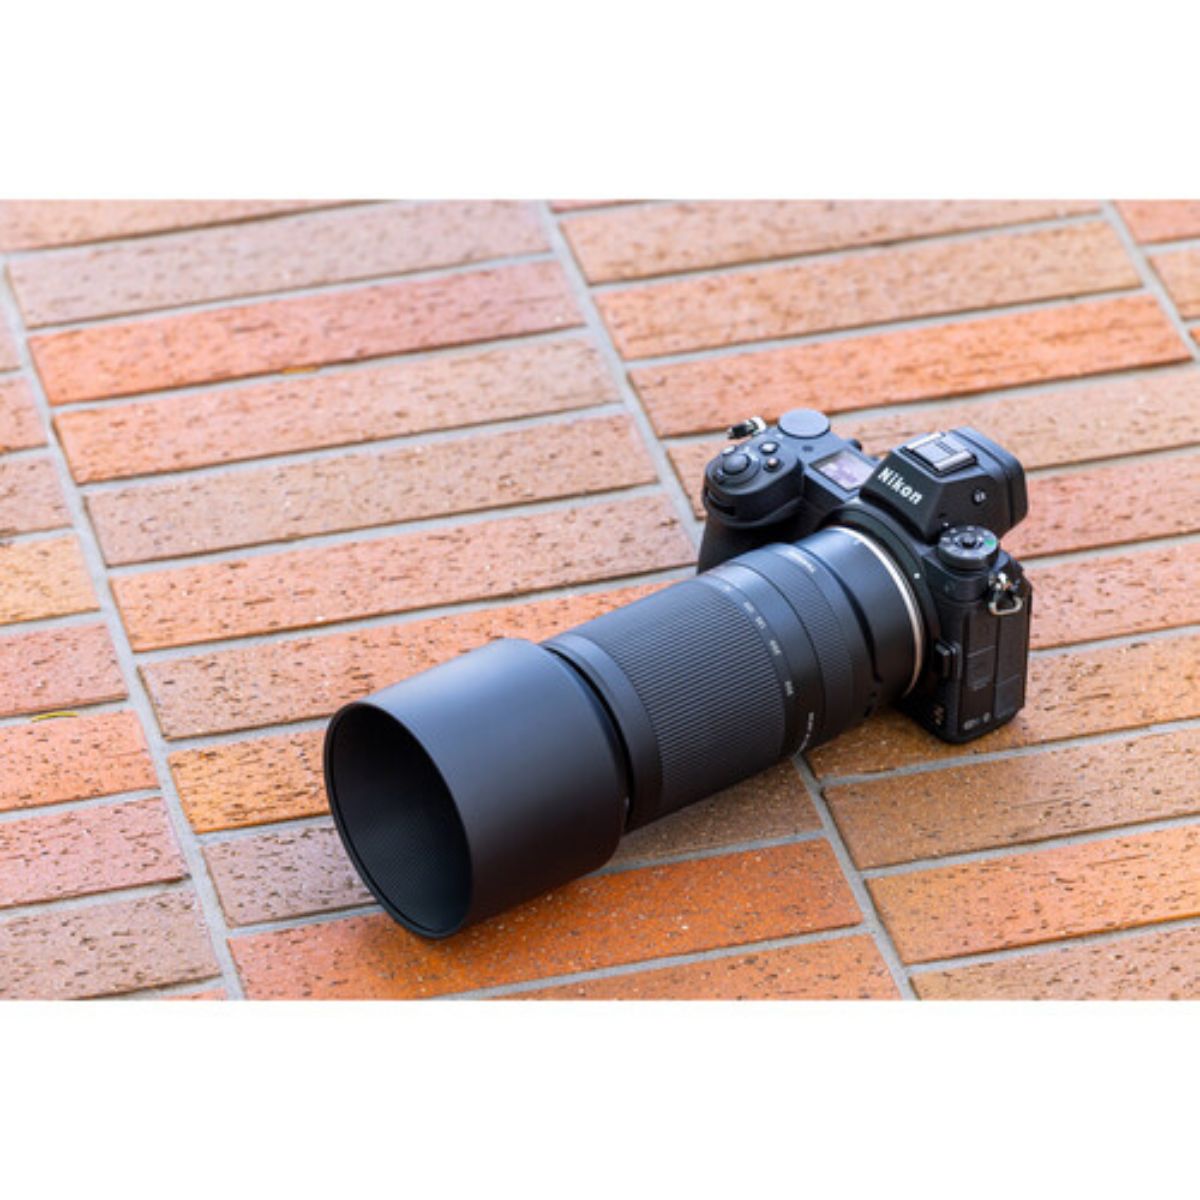 Tamron 70-300mm f/4.5-6.3 Di III RXD Nikon Z-Mount Full Frame AF Autofocus Dynamic Telephoto Zoom Lens for Mirrorless Cameras | A047 / A047Z